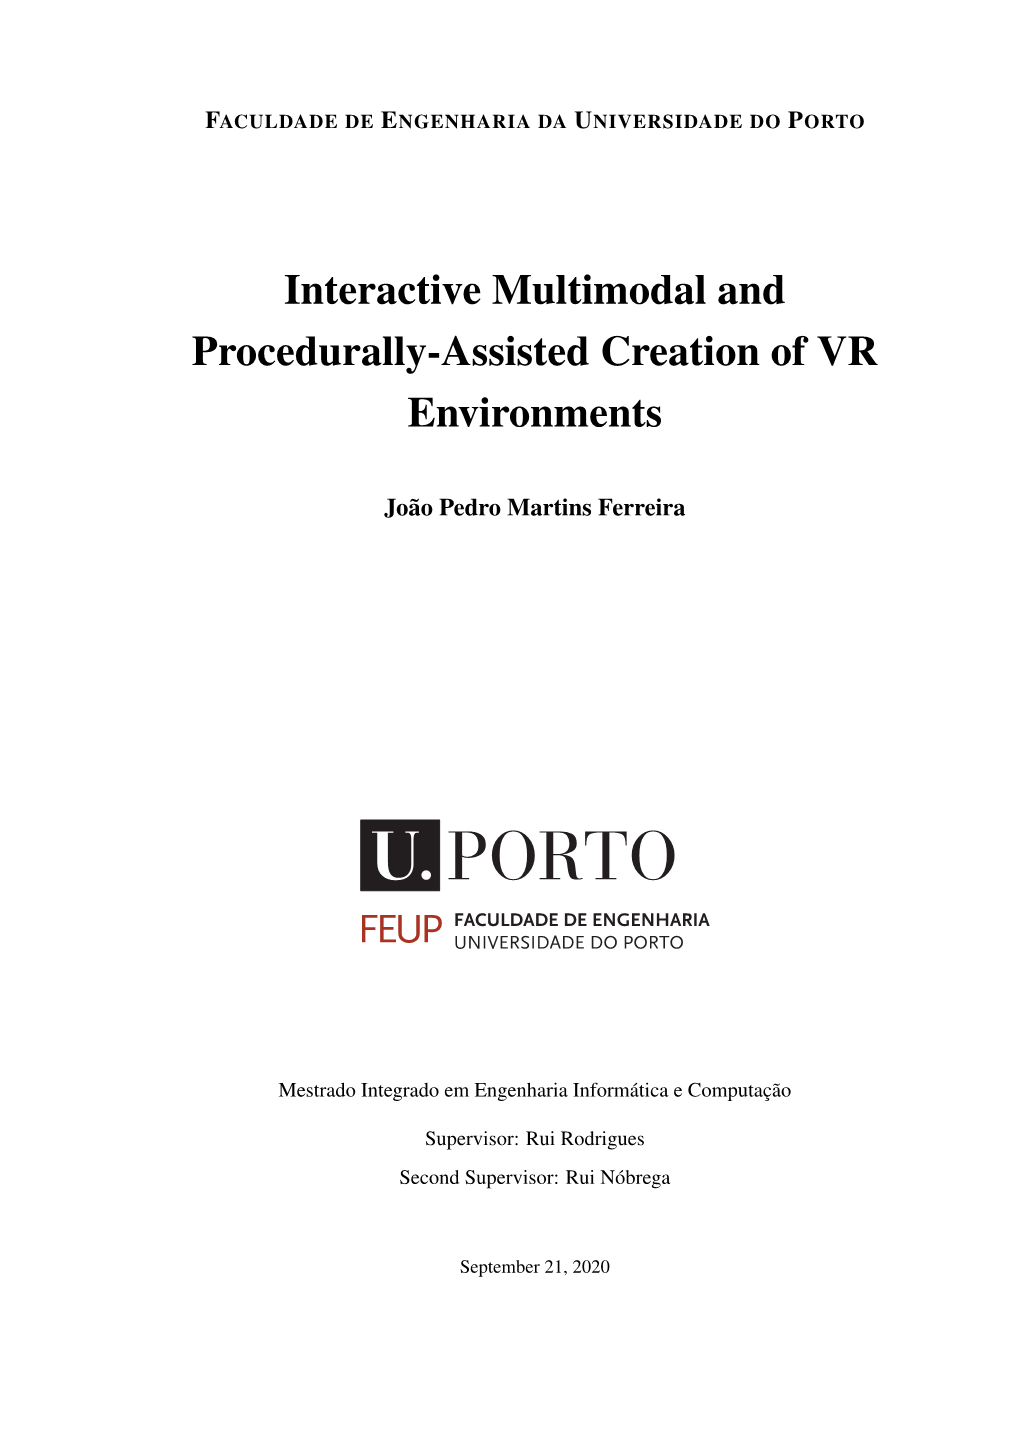 Interactive Multimodal and Procedurally-Assisted Creation of VR Environments